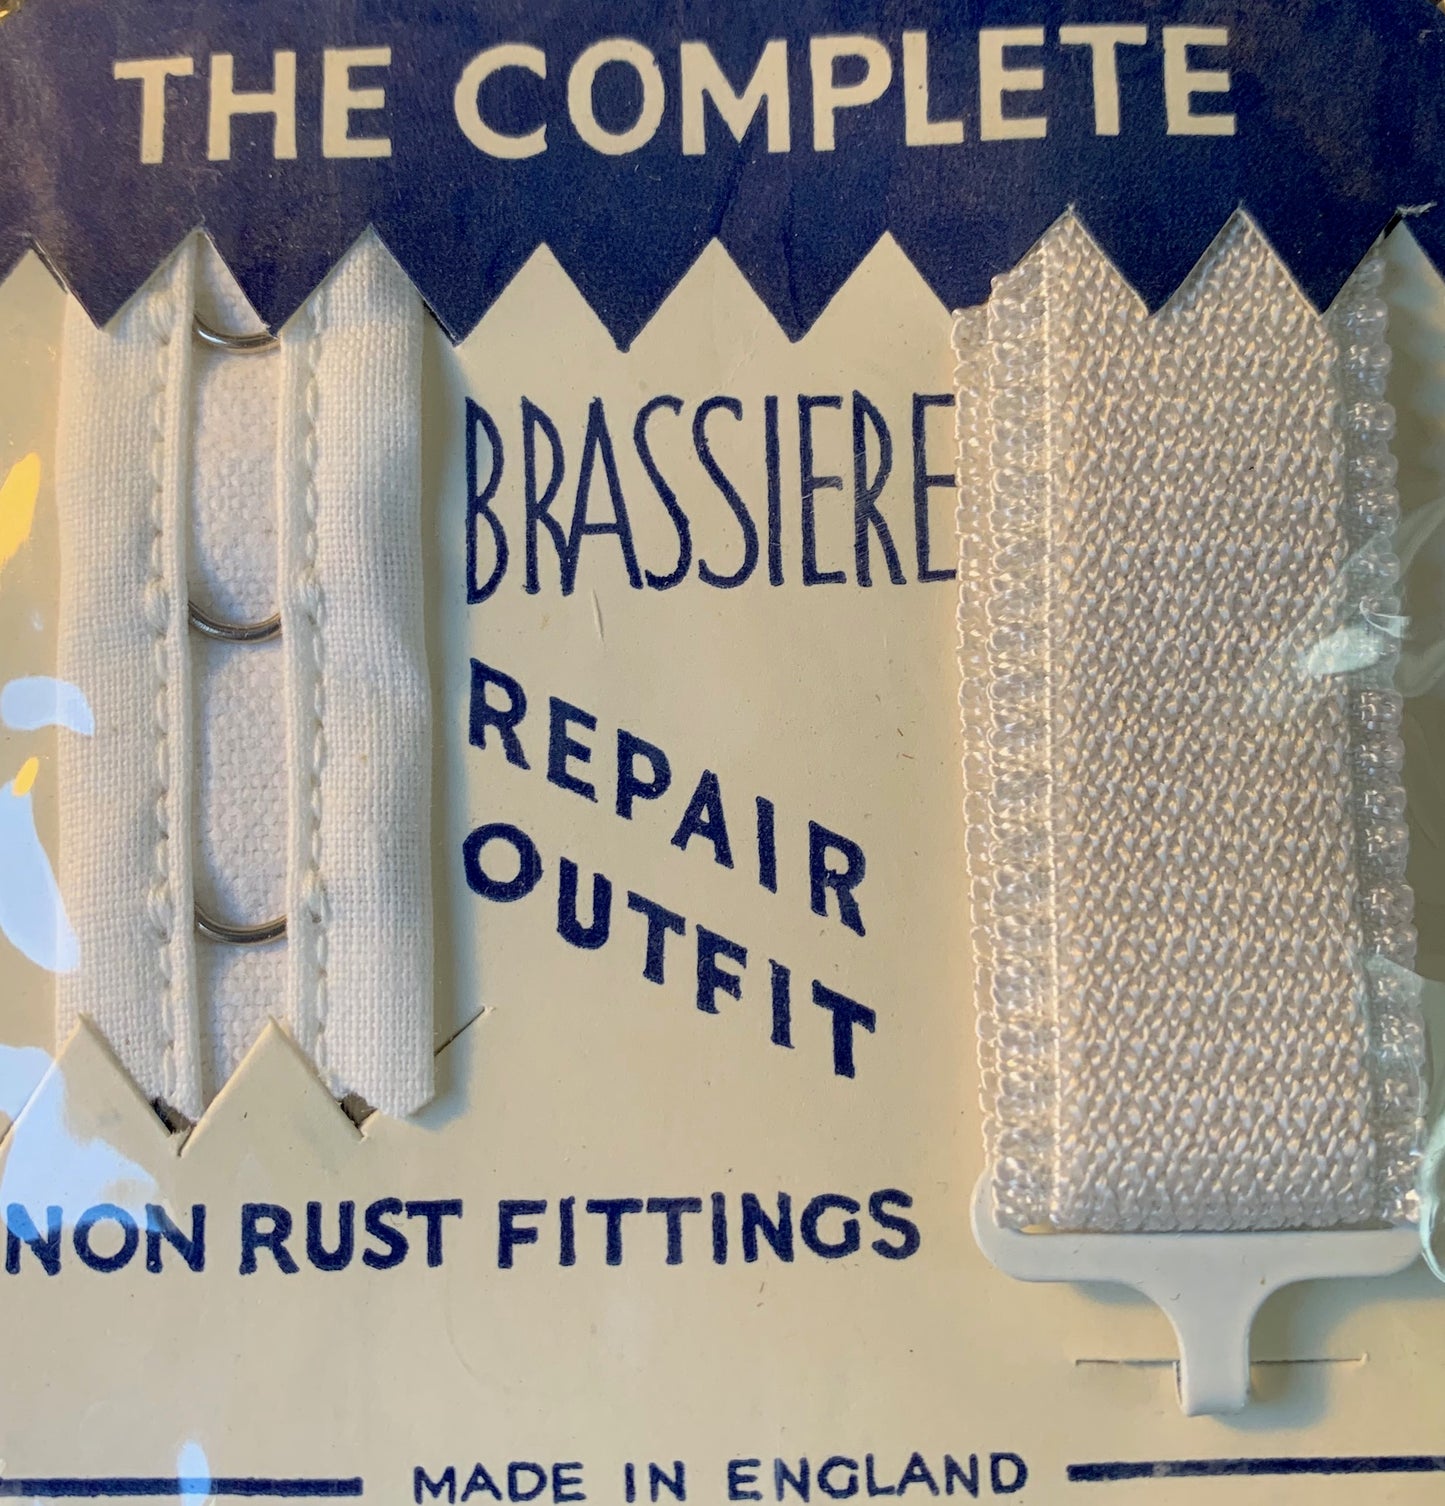 THE COMPLETE  BRASSIERE REPAIR OUTFIT